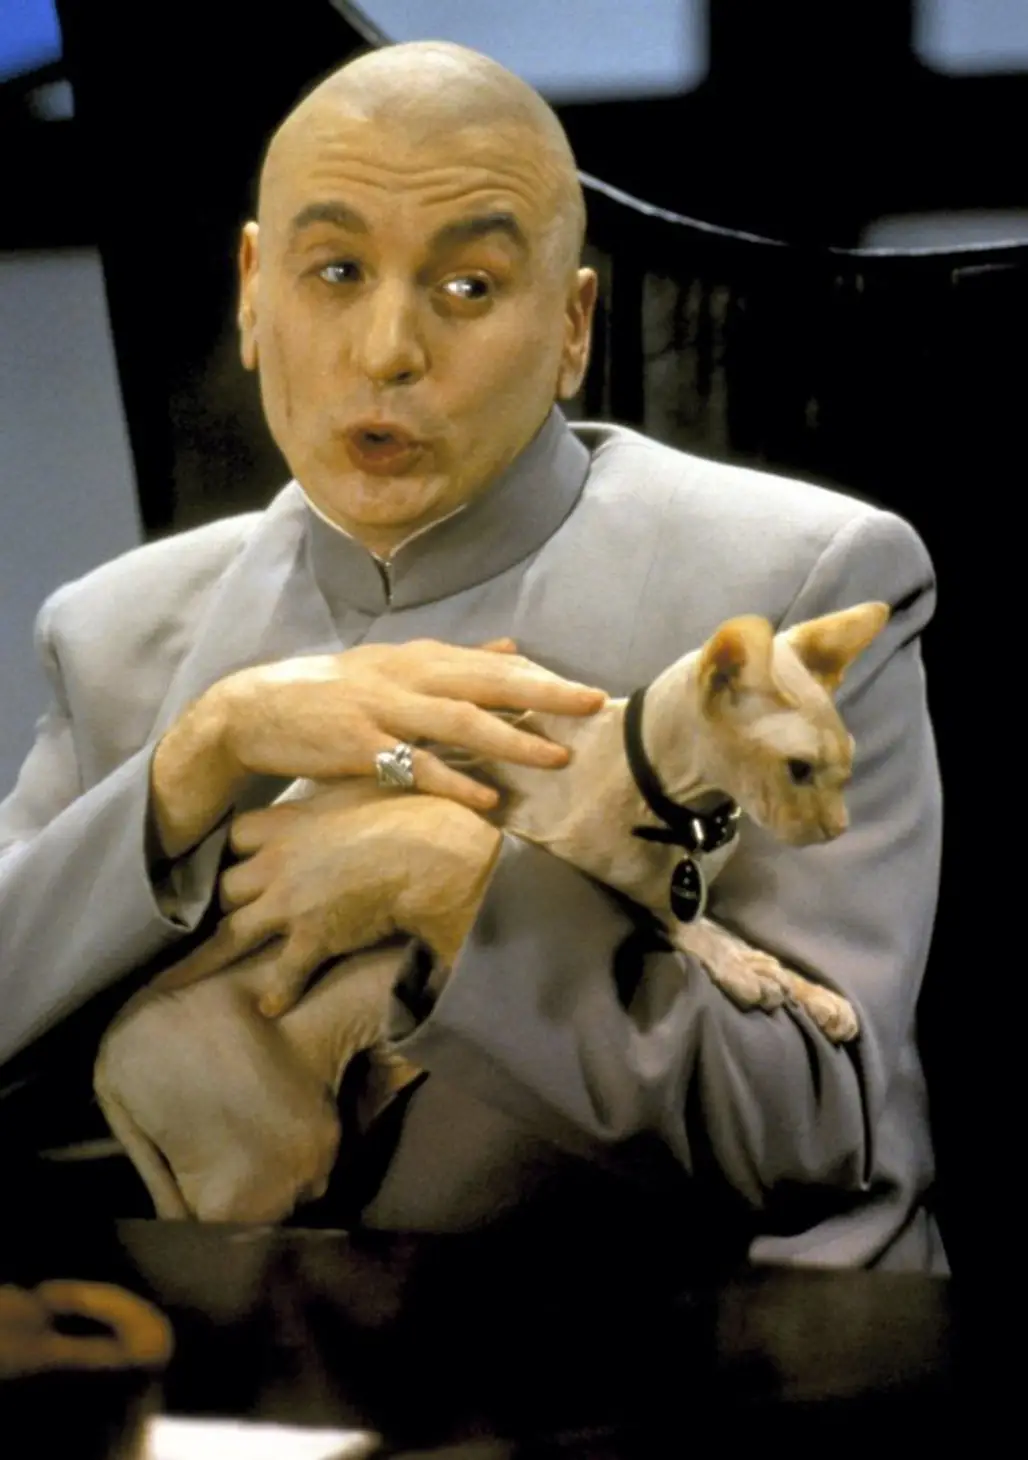 Dr. Evil from Austin Powers